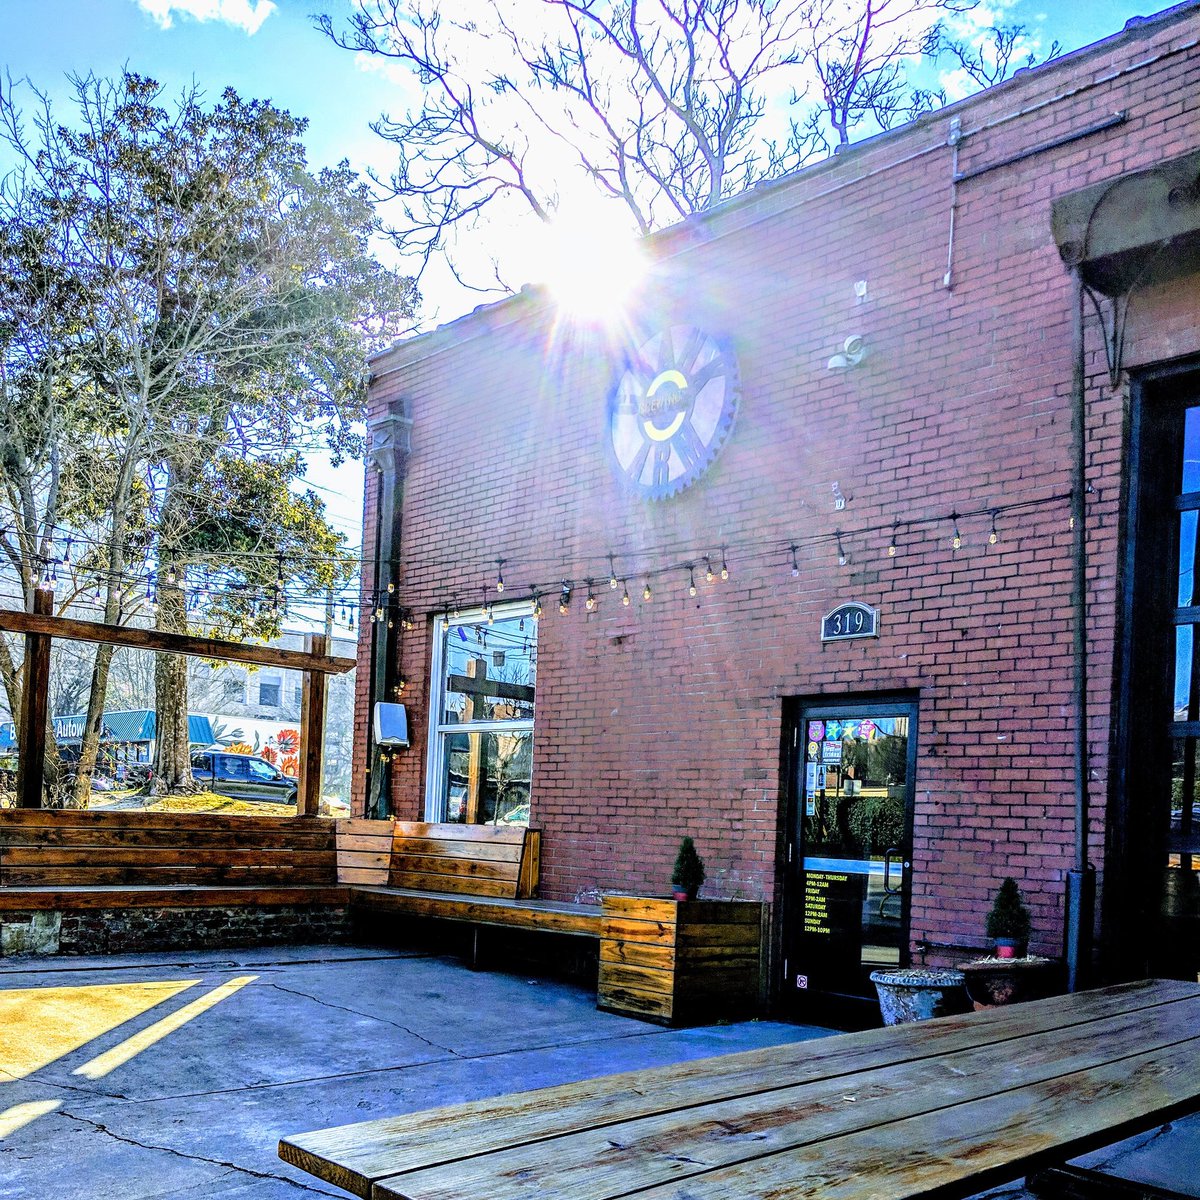 What's this patio missing?

YOU!

The tasting room opens at 4PM today. 

#crankarmy #70degreesinfebruary #mrbluesky  #beeroclock #ncbeer #patioweather #beerlovebikelove